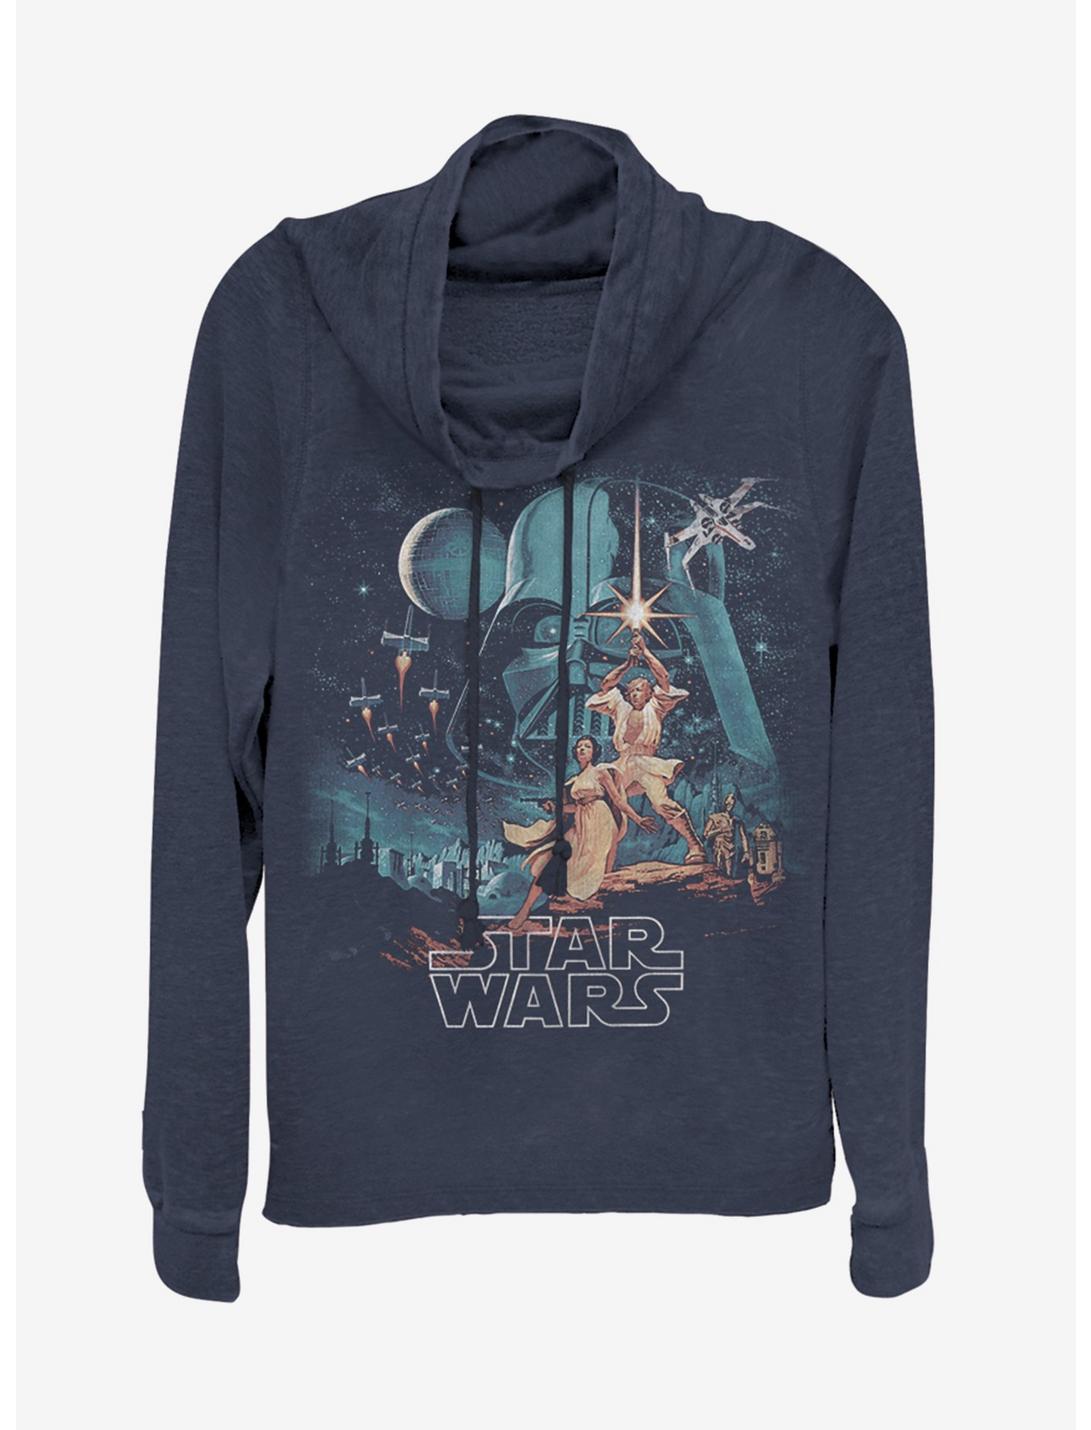 Star Wars Two Hopes Cowlneck Long-Sleeve Womens Top, NAVY, hi-res